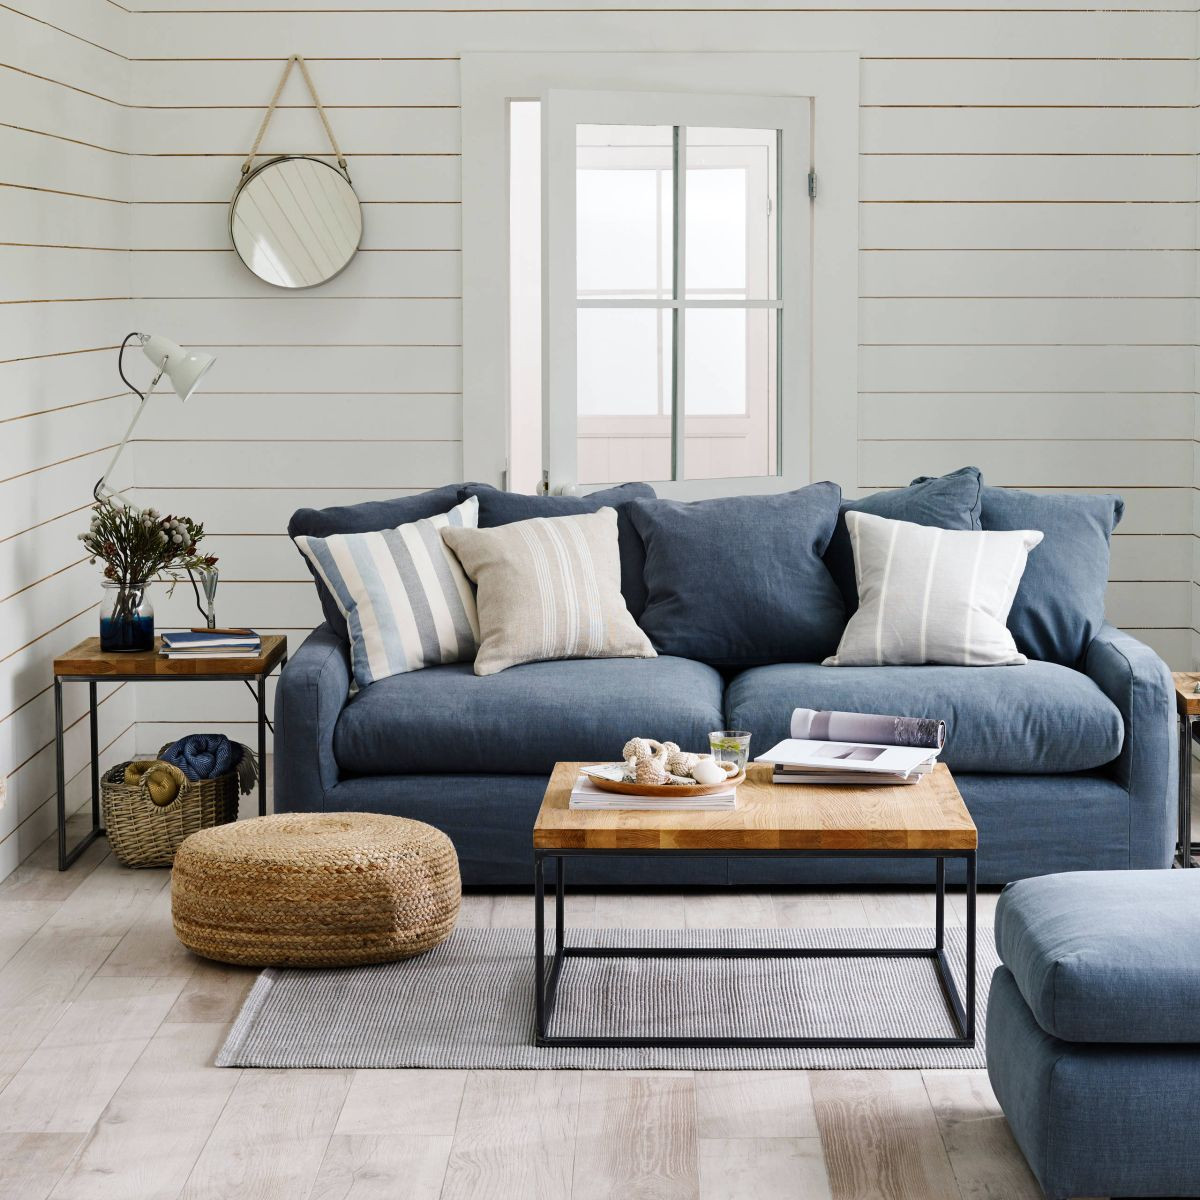 Living Room Pictures For Walls
 5 Reasons To Put Shiplap Walls In Every Room